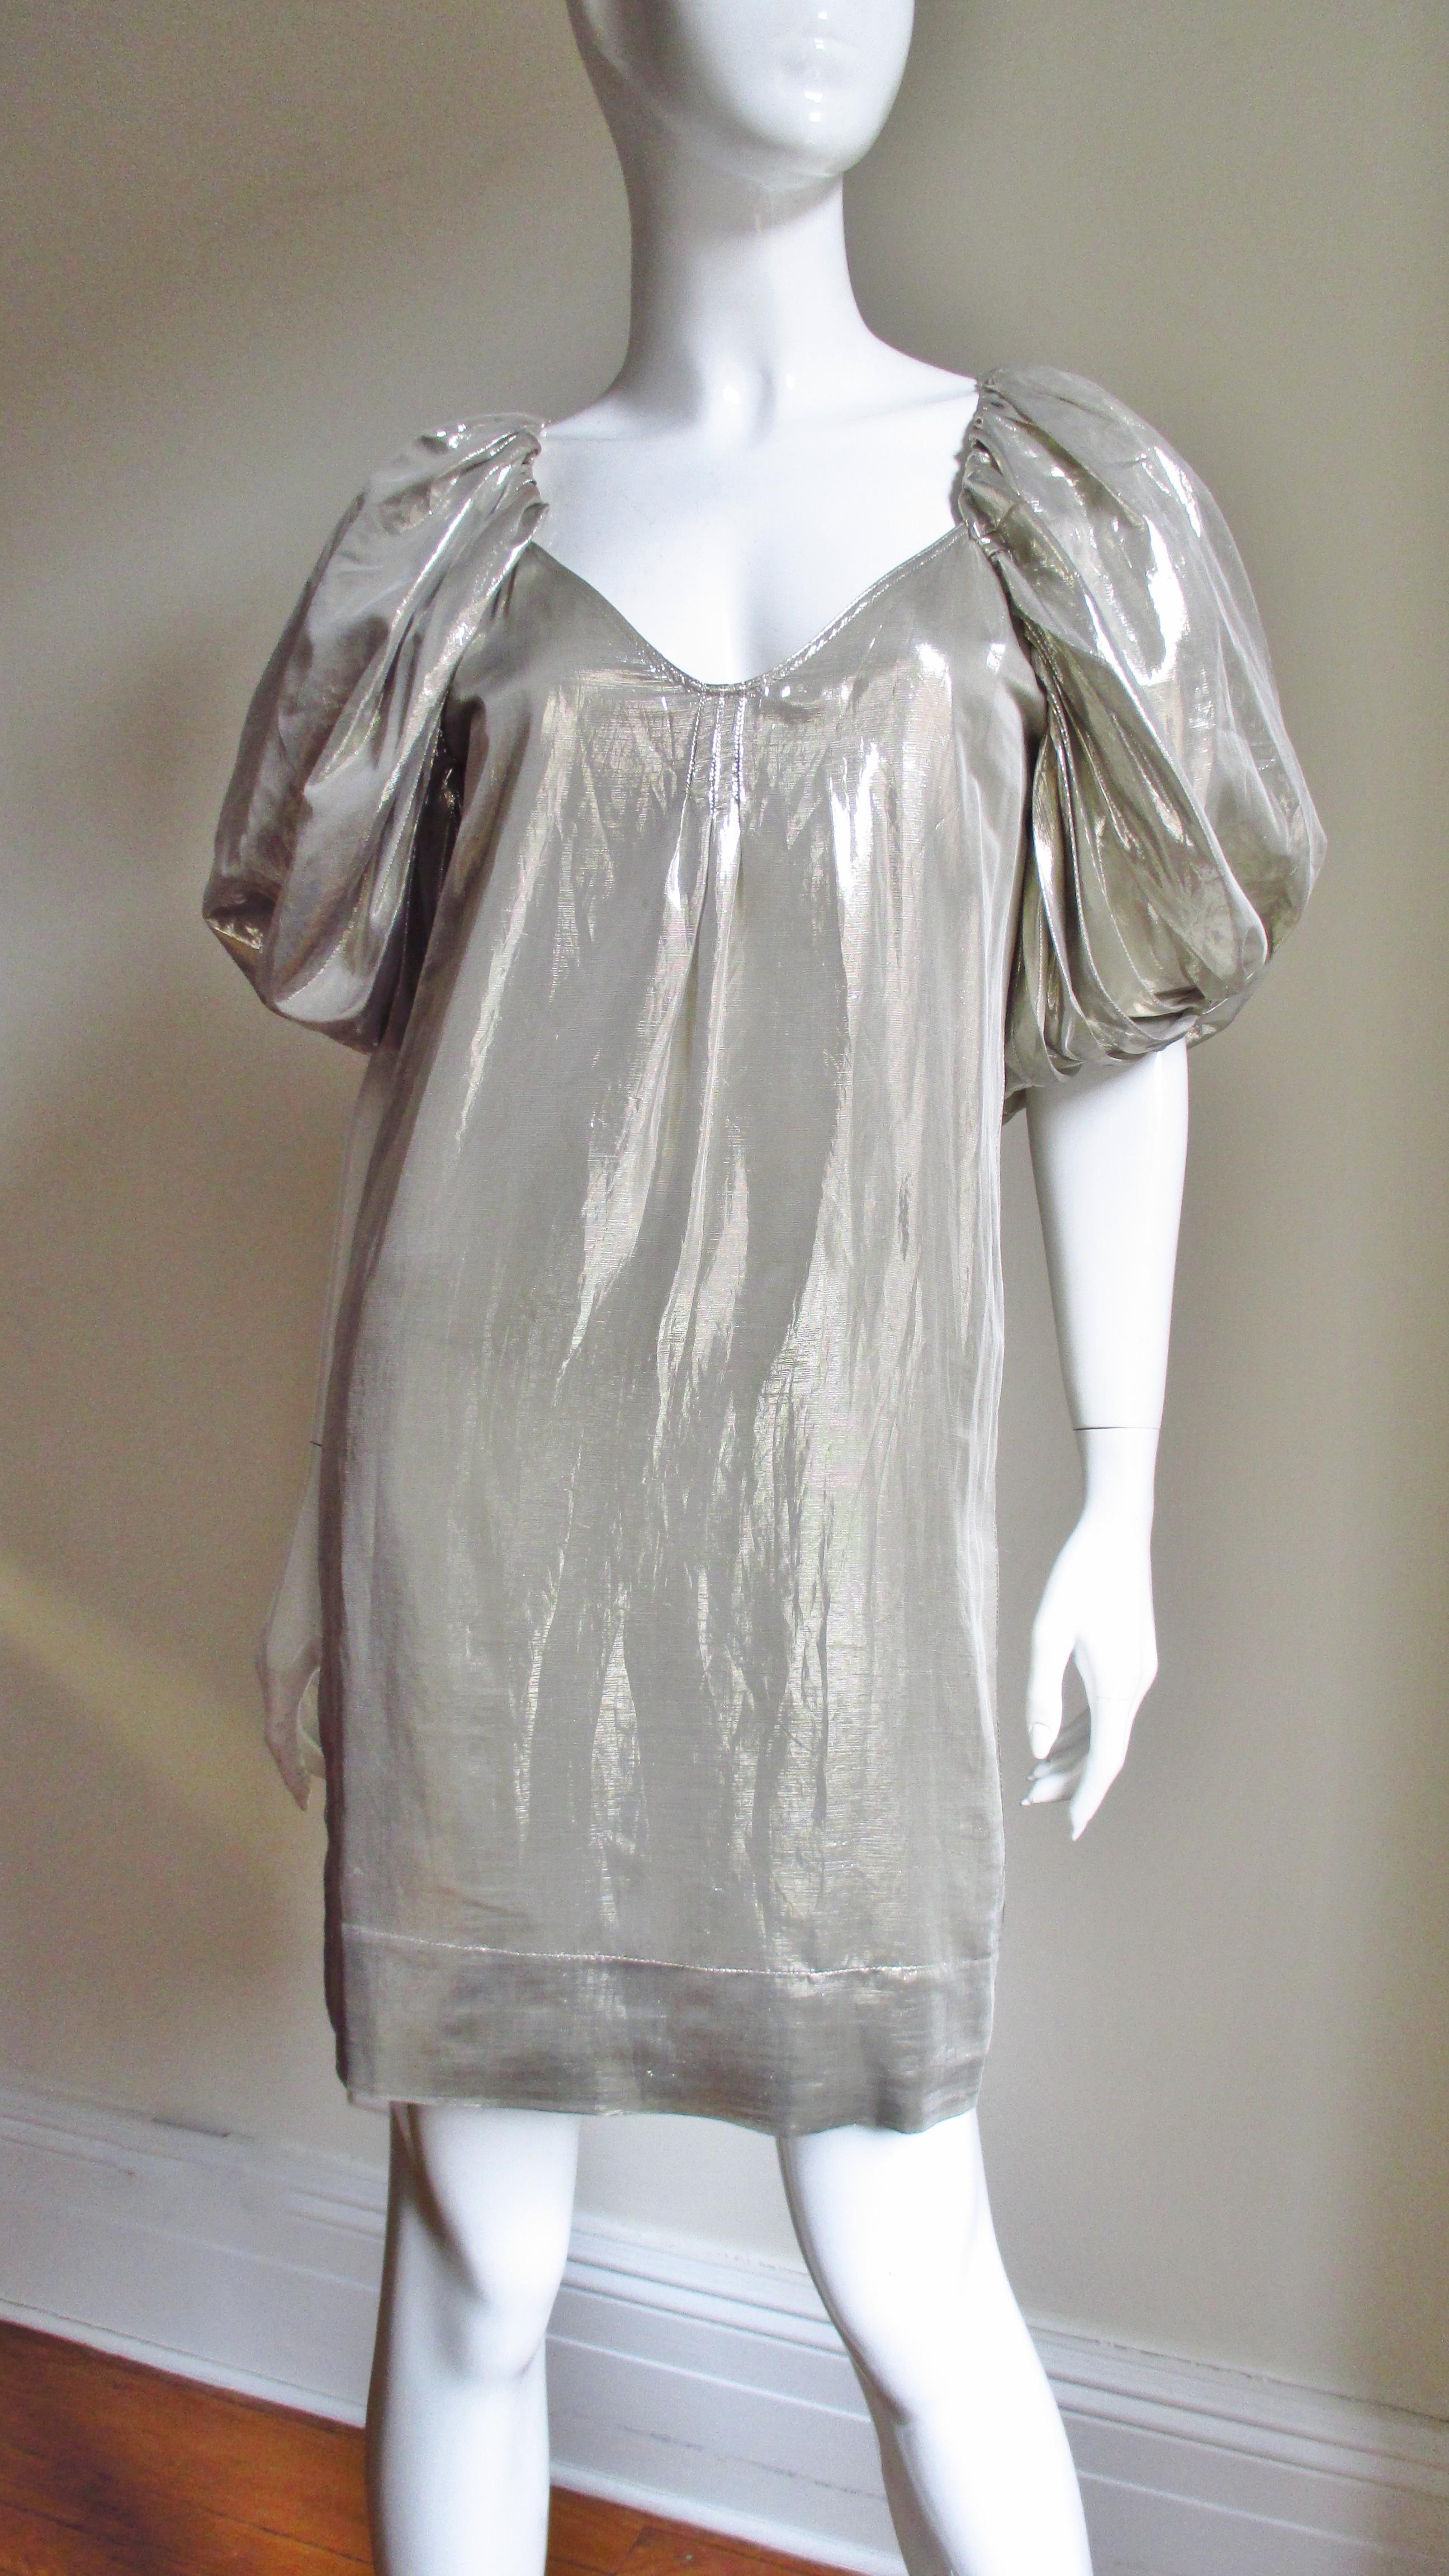 A pretty silver silk dress from Stella McCartney's S/S 2007 collection.  It has a V neck and full elbow length sleeves. It is fully lined and slips on over the head.  
Fits sizes Extra Small, Small.

Bust  34